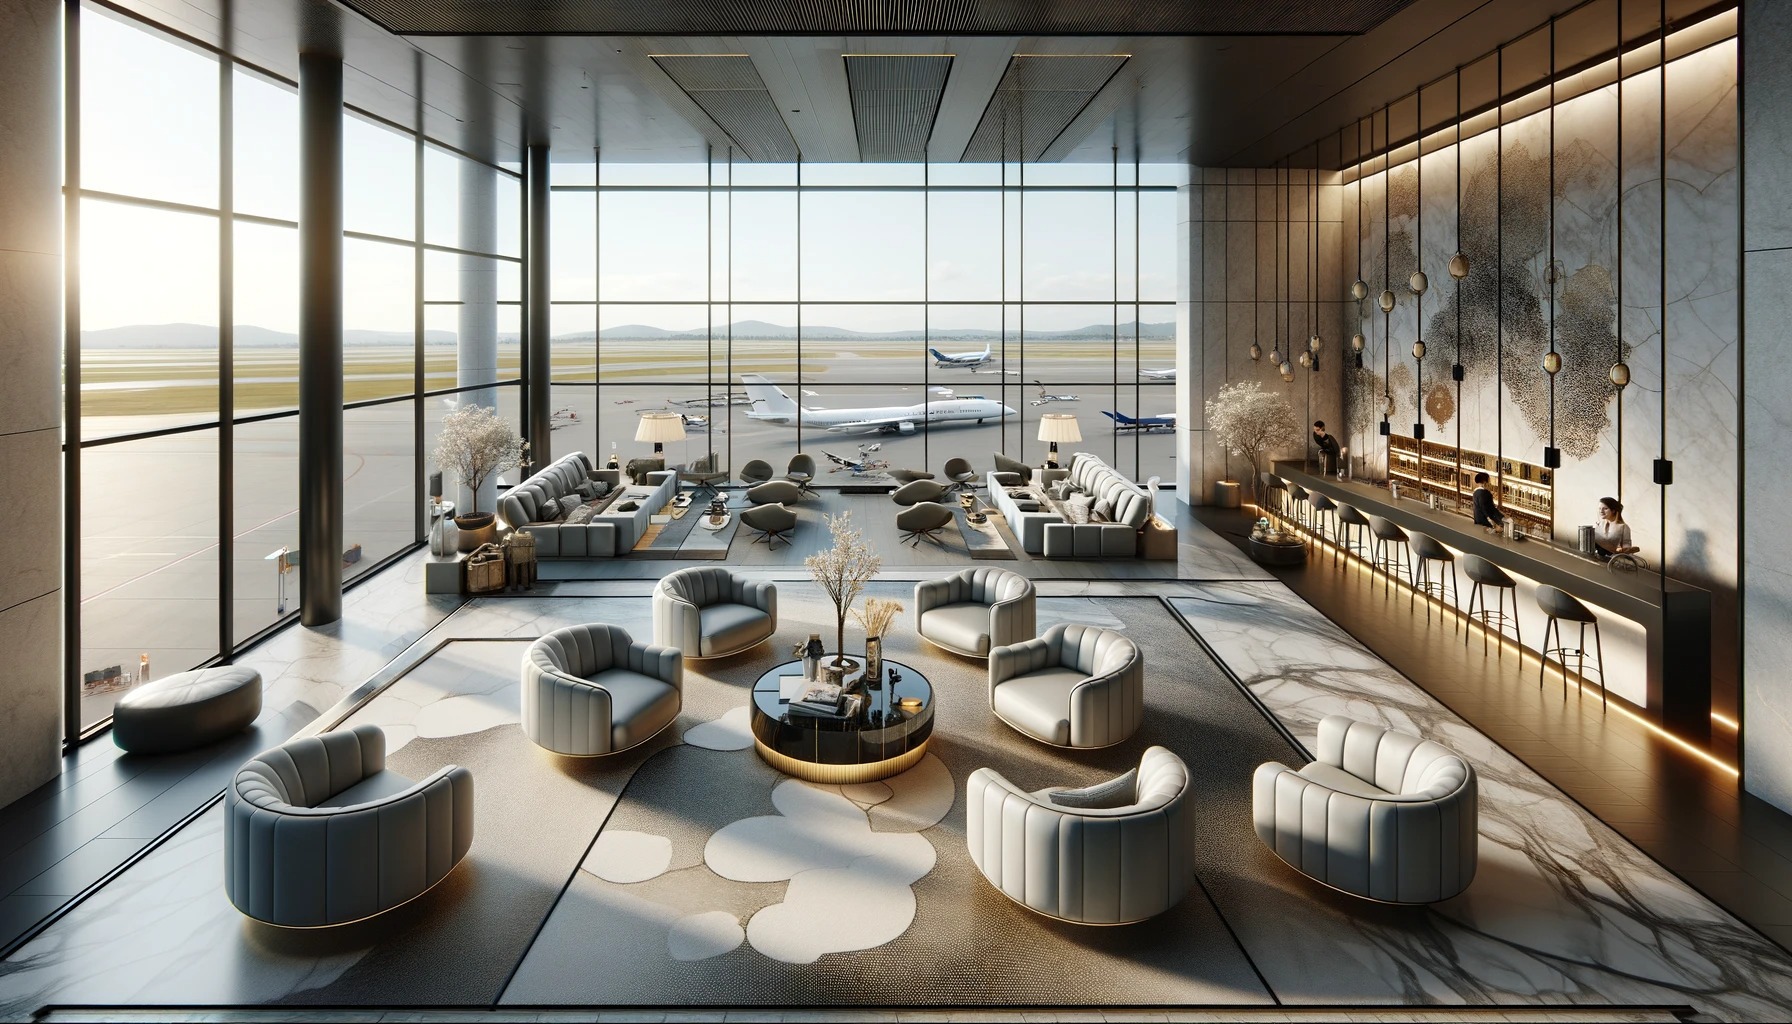 A luxurious airport lounge